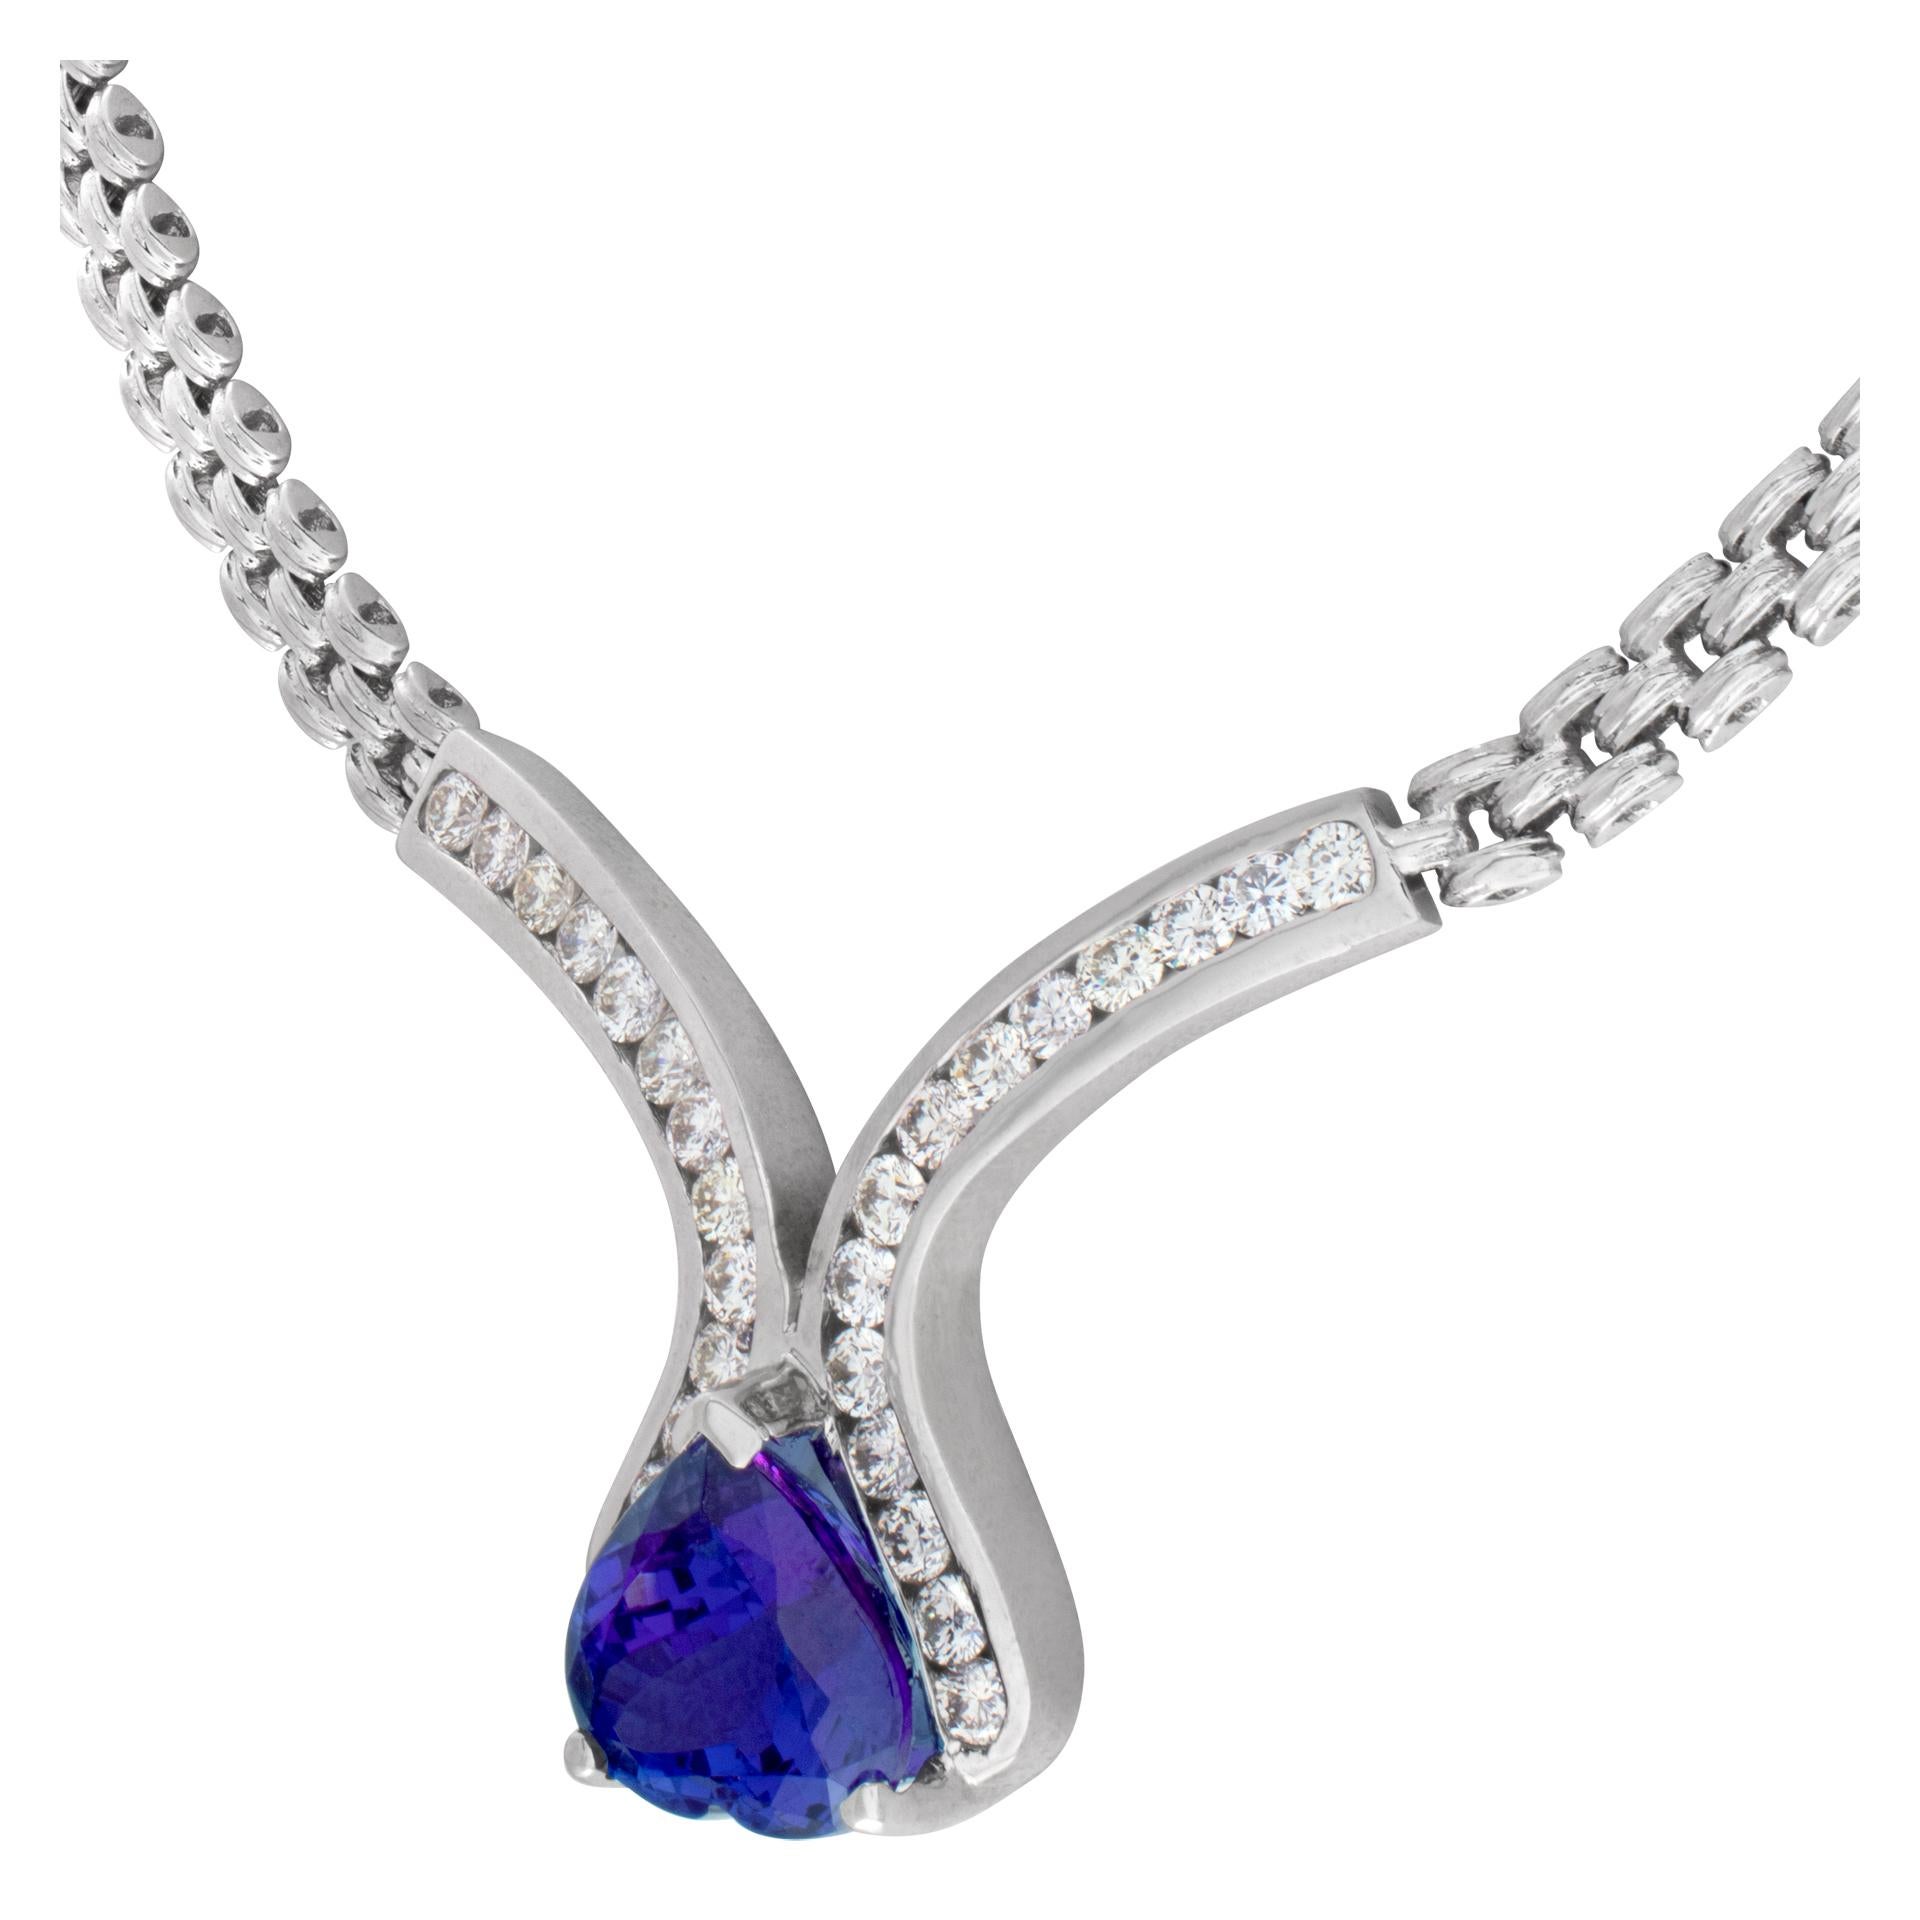 Women's 14k White Gold Necklace with a 13.15 Carat Heart Shape Tanzanite Surrounded For Sale